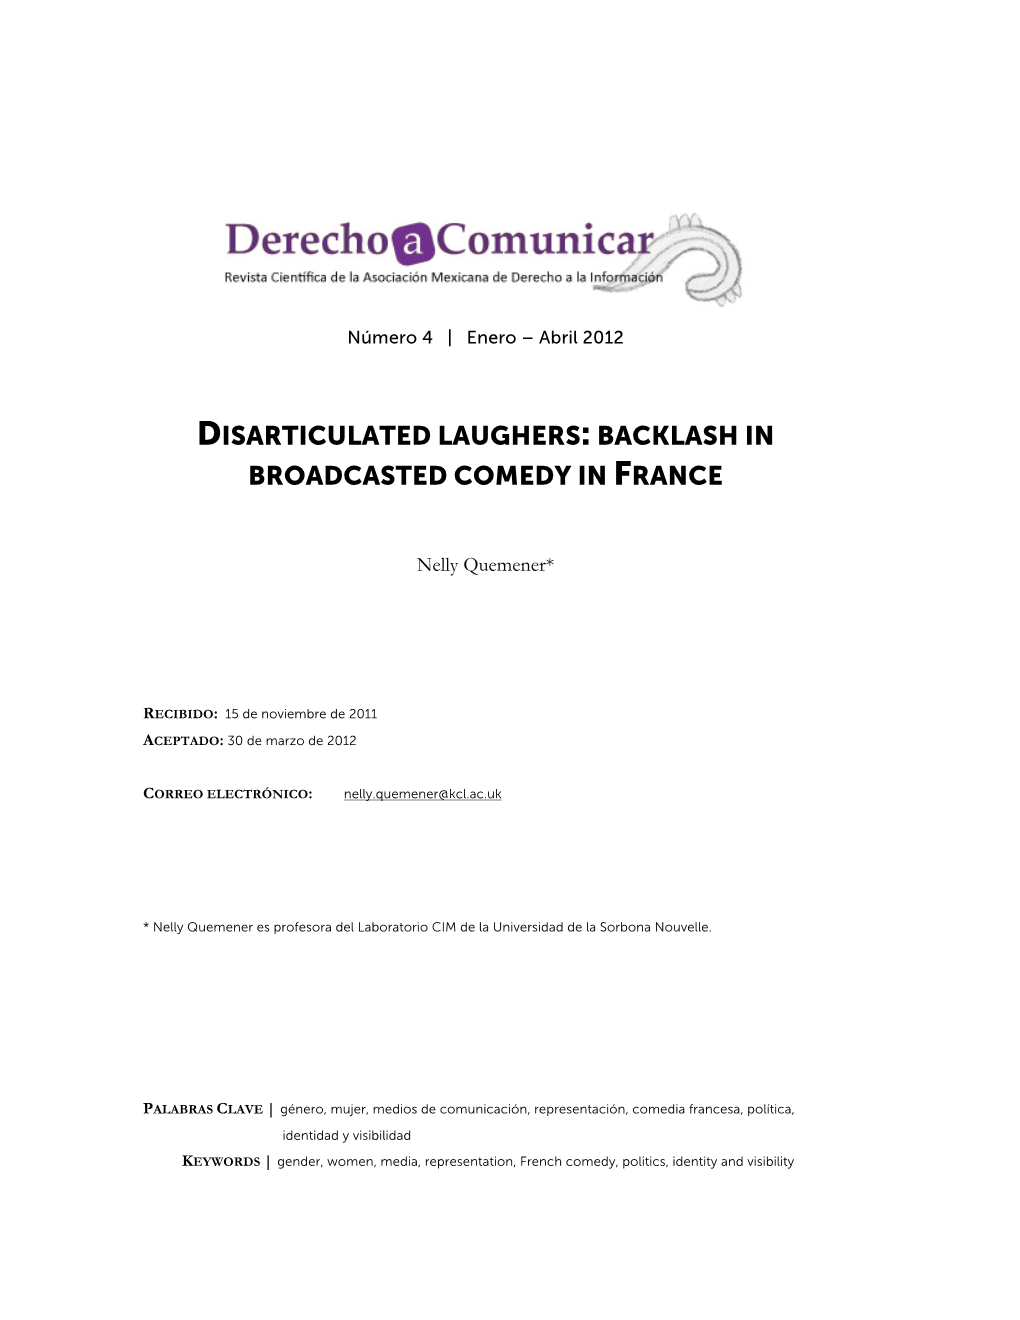 Disarticulated Laughers: Backlash in Broadcasted Comedy in France